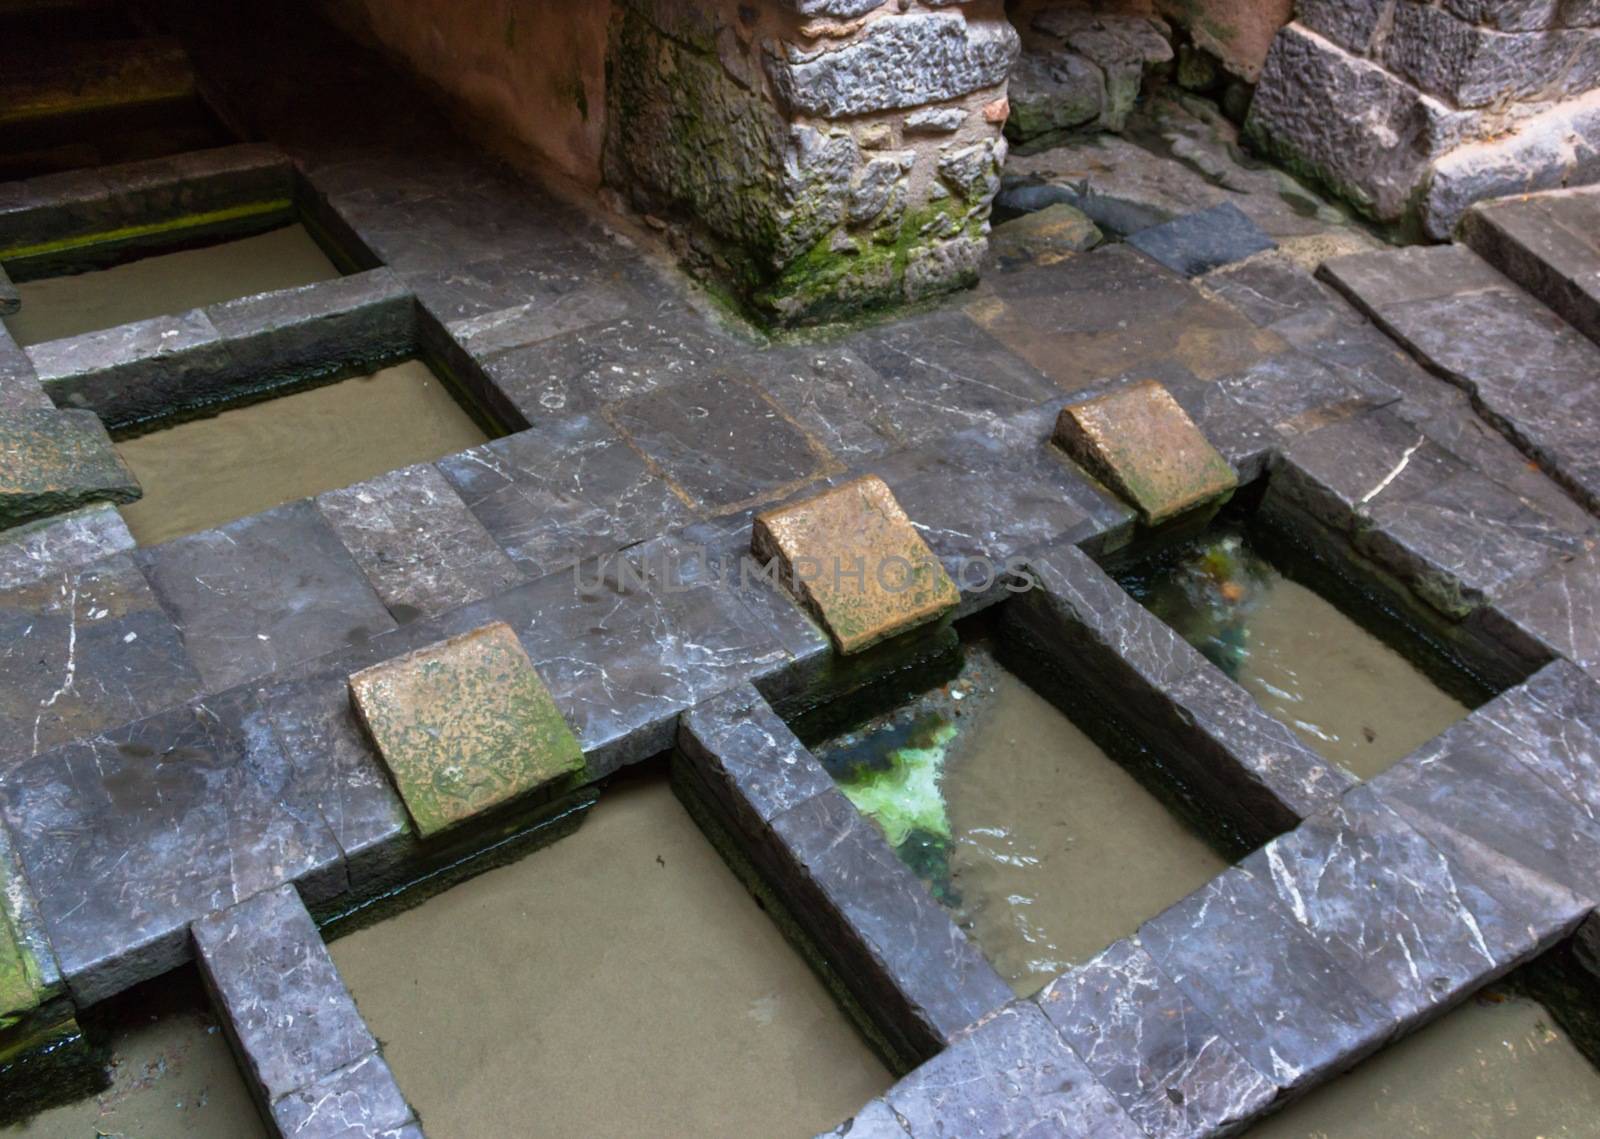 The public wash known as medieval wash-house, is located within the old city walls